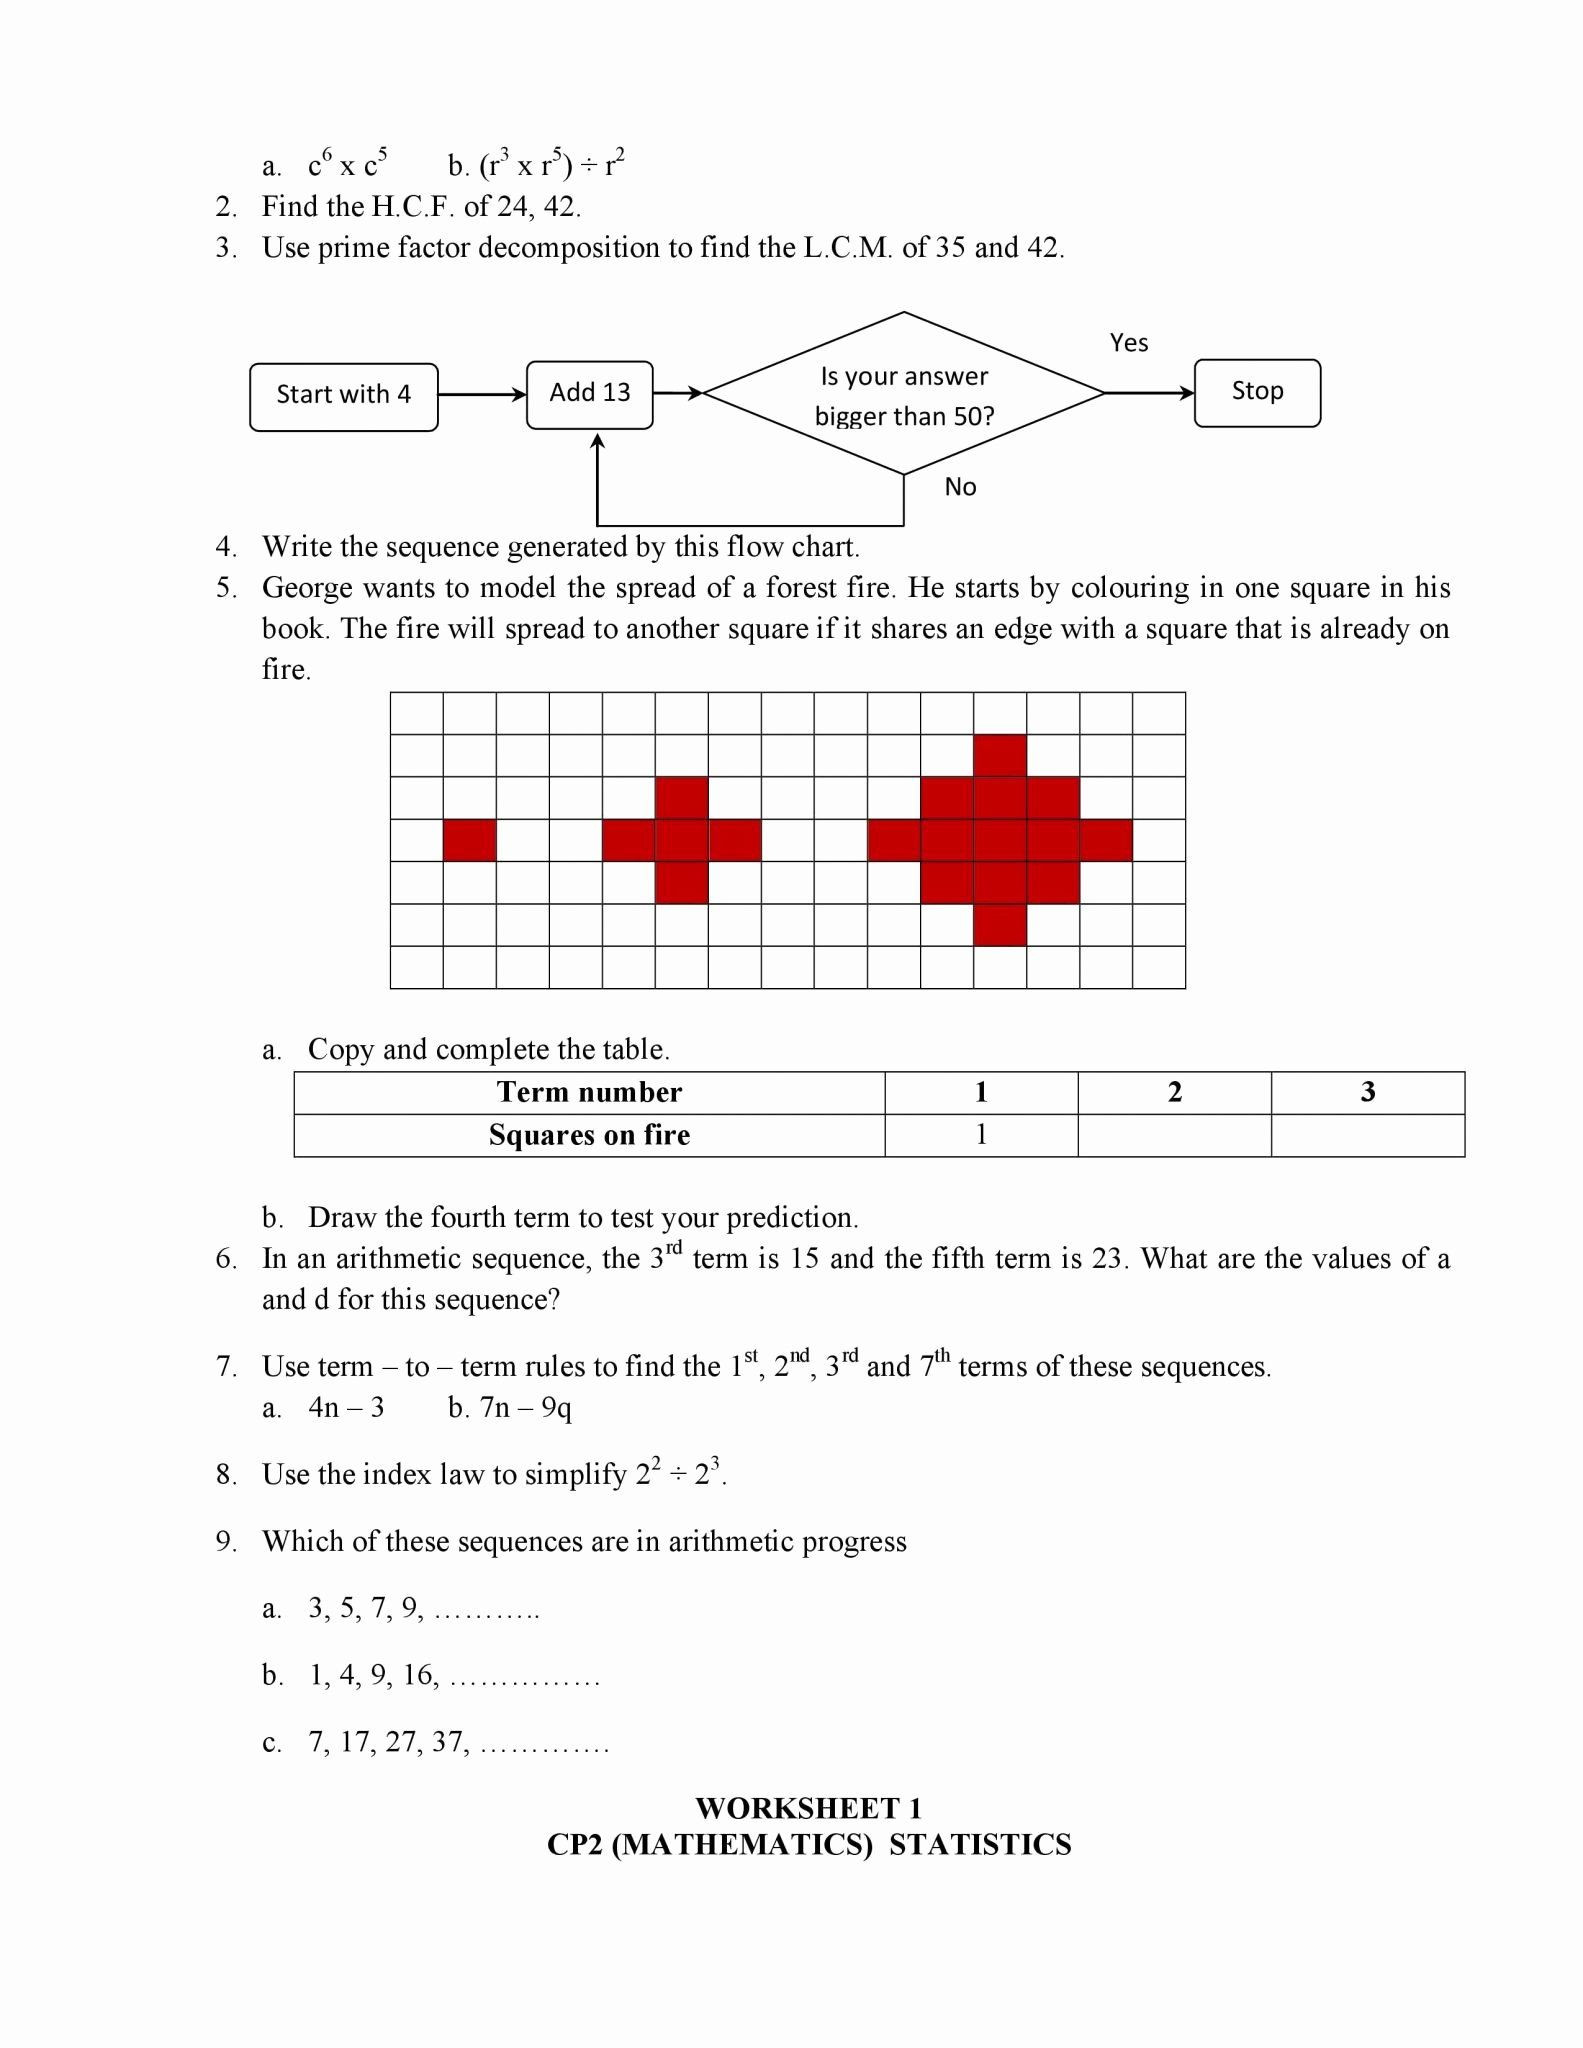 Arithmetic Sequence Worksheet Answers 50 Arithmetic Sequence Worksheet Answers In 2020